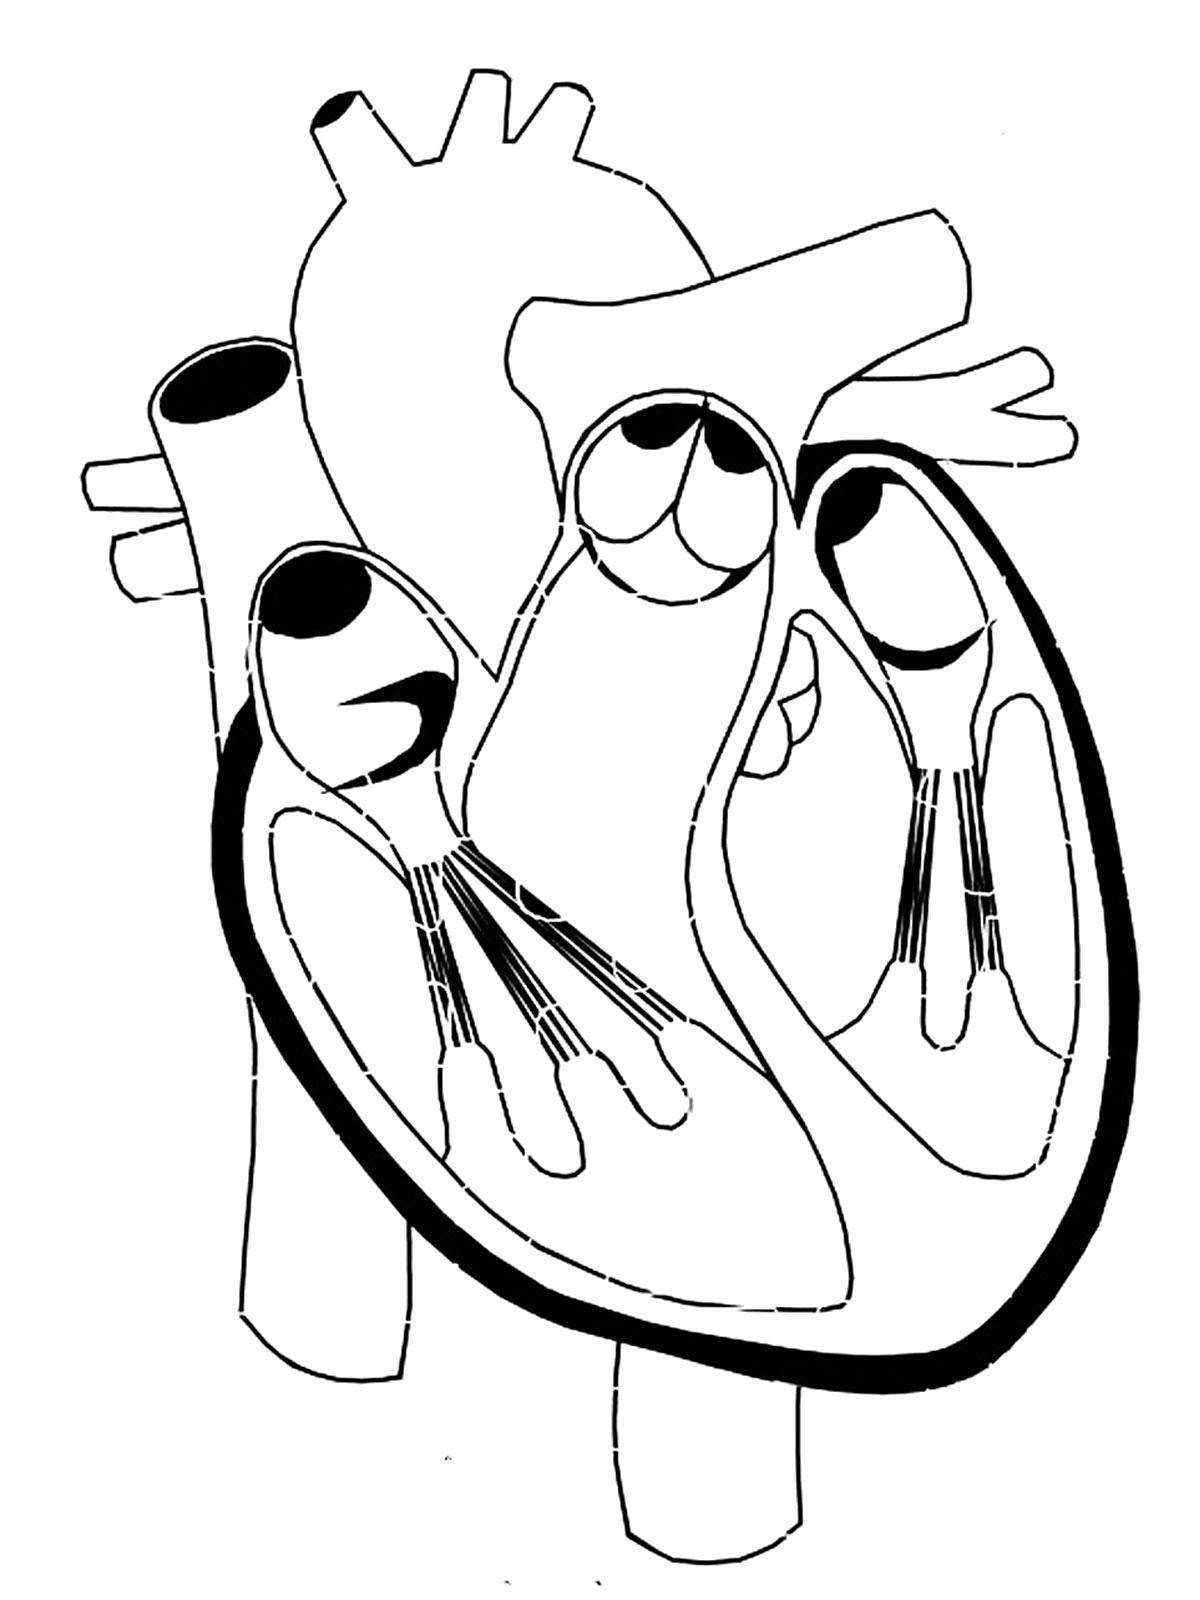 Exquisite human heart coloring page